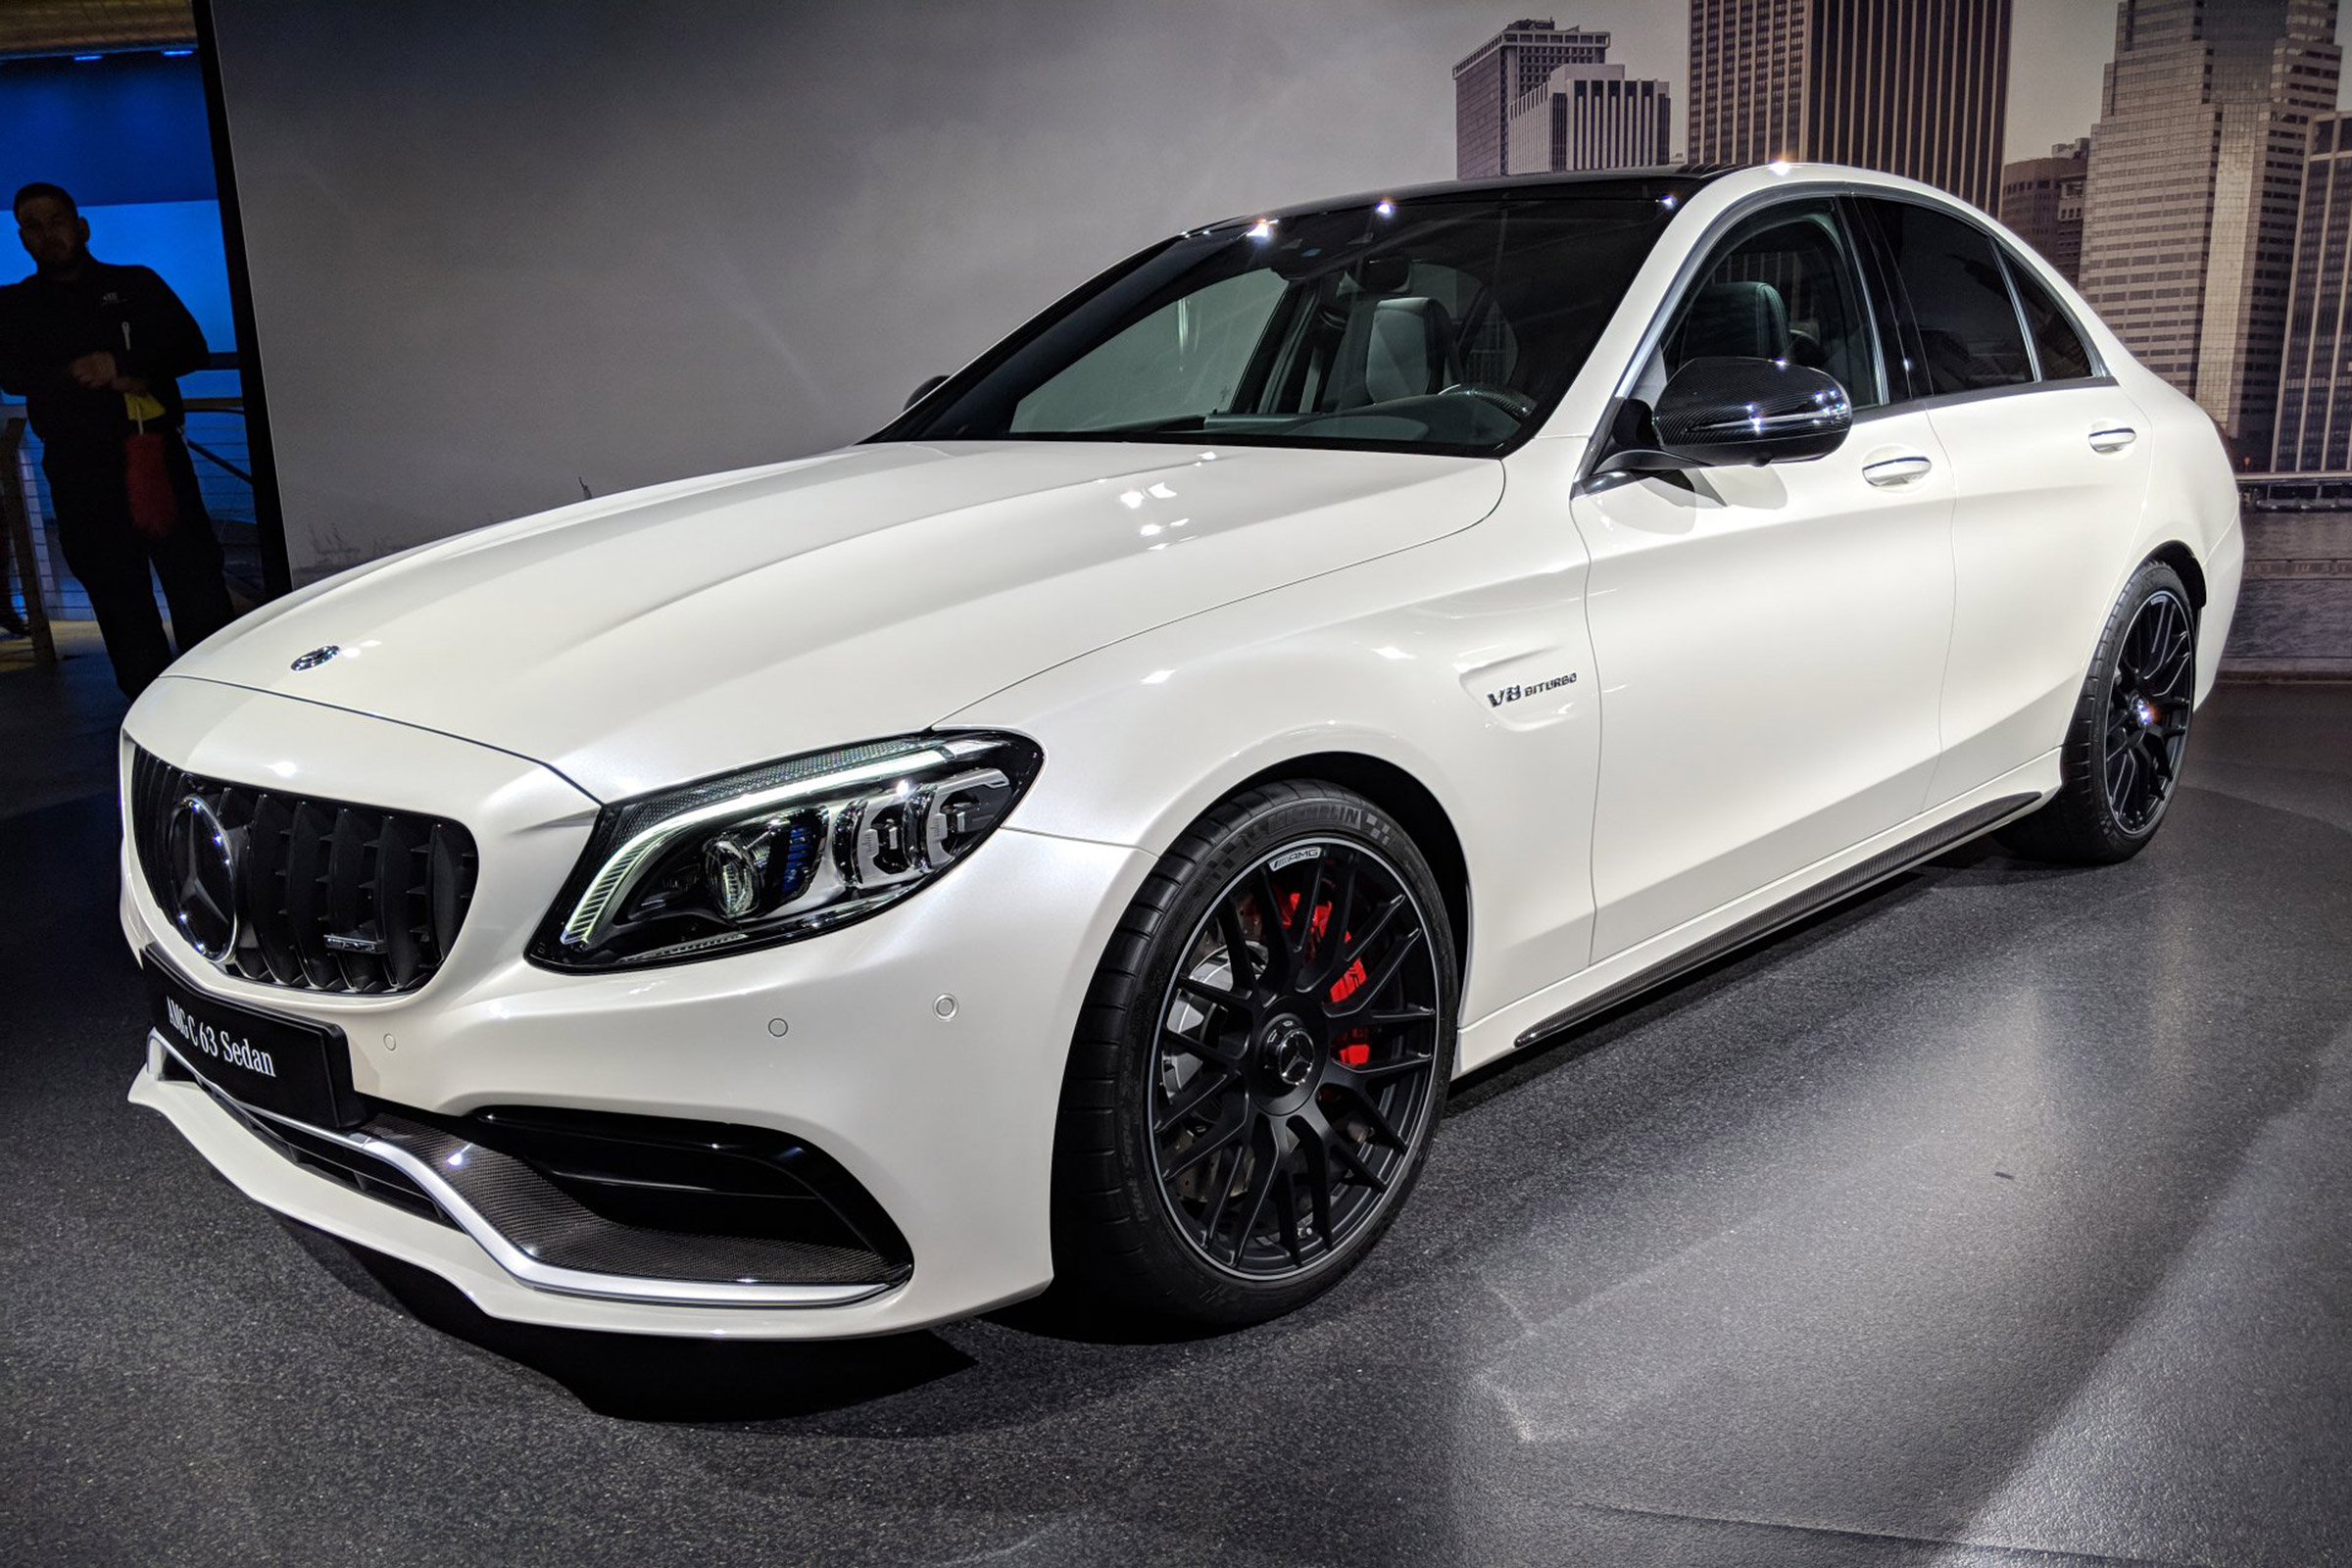 New Mercedes Amg C 63 Facelift Uk Prices And Specs Revealed Auto Express